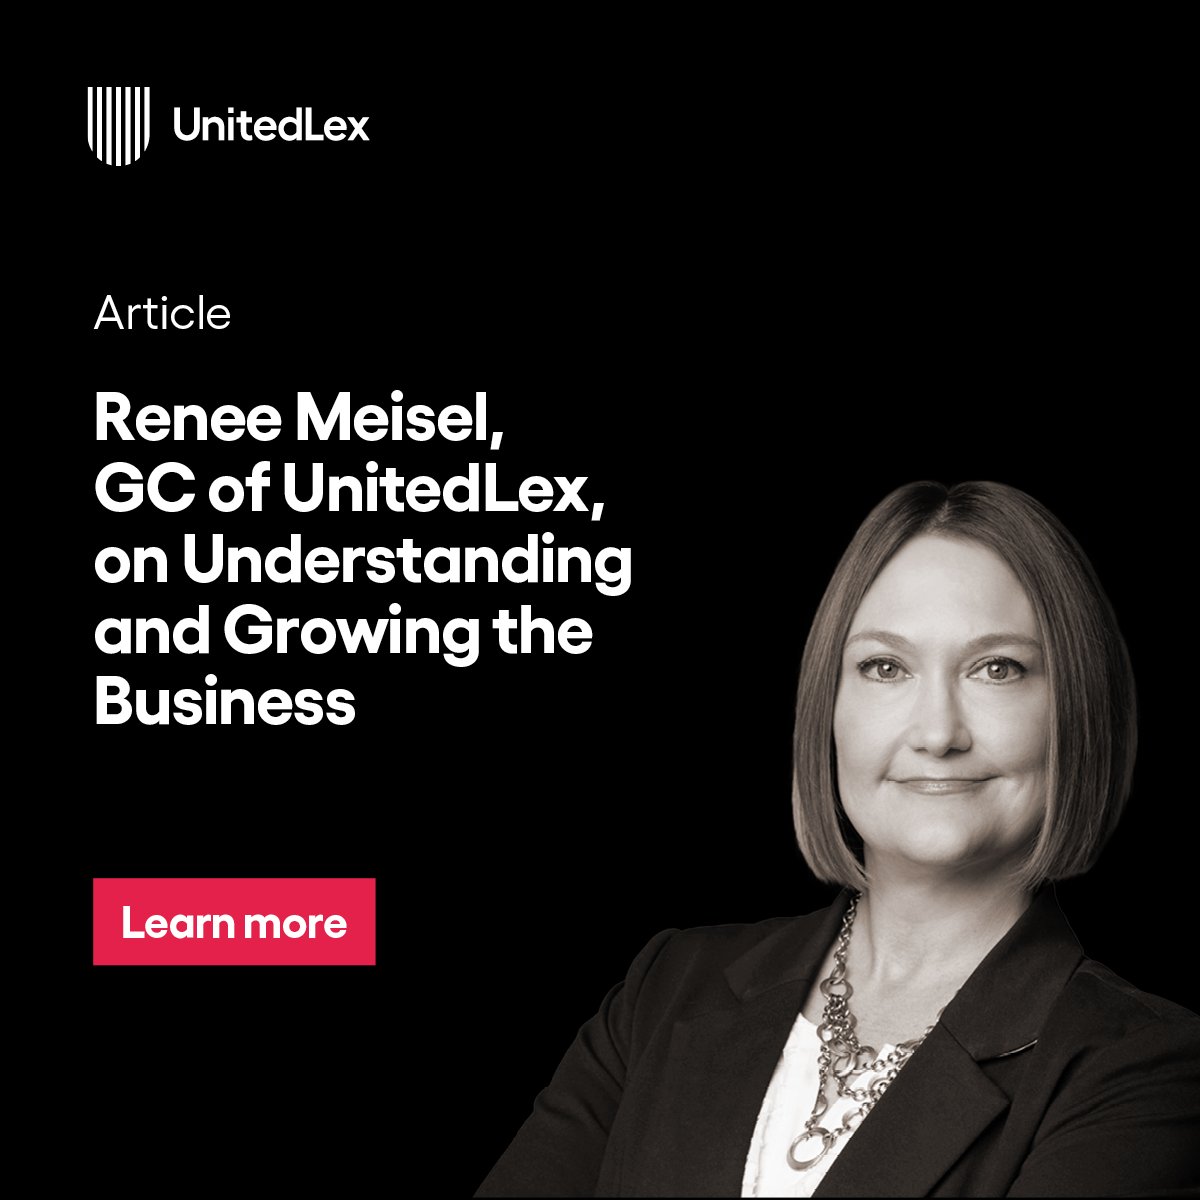 In a recent interview with Corporate Counsel, Renee Meisel talks about what attracted her to UnitedLex and offers advice for aspiring in-house legal leaders: hubs.li/Q02r8VwY0 #legalops #corporatecounsel #interview #unitedlex #generalcounsel #growth #inspiration